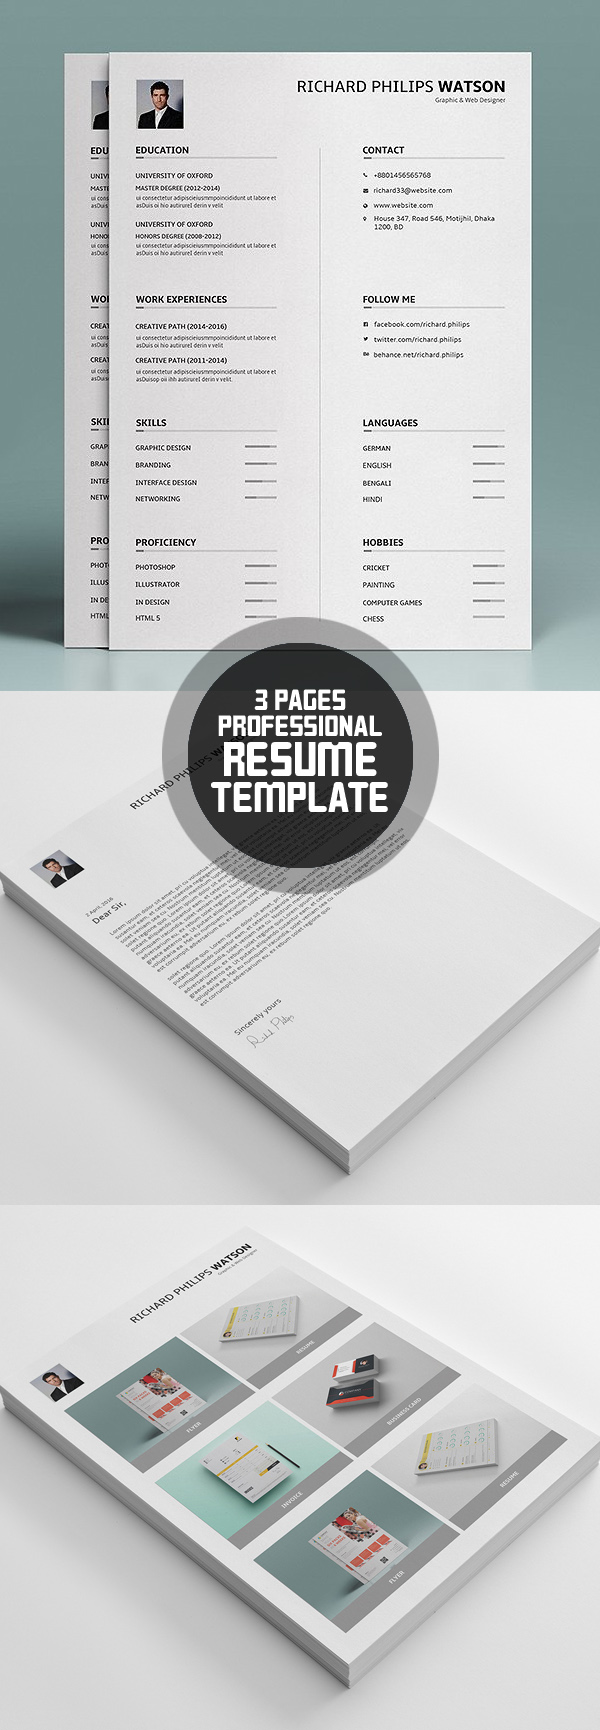 50 Best Resume Templates For 2018 - 24